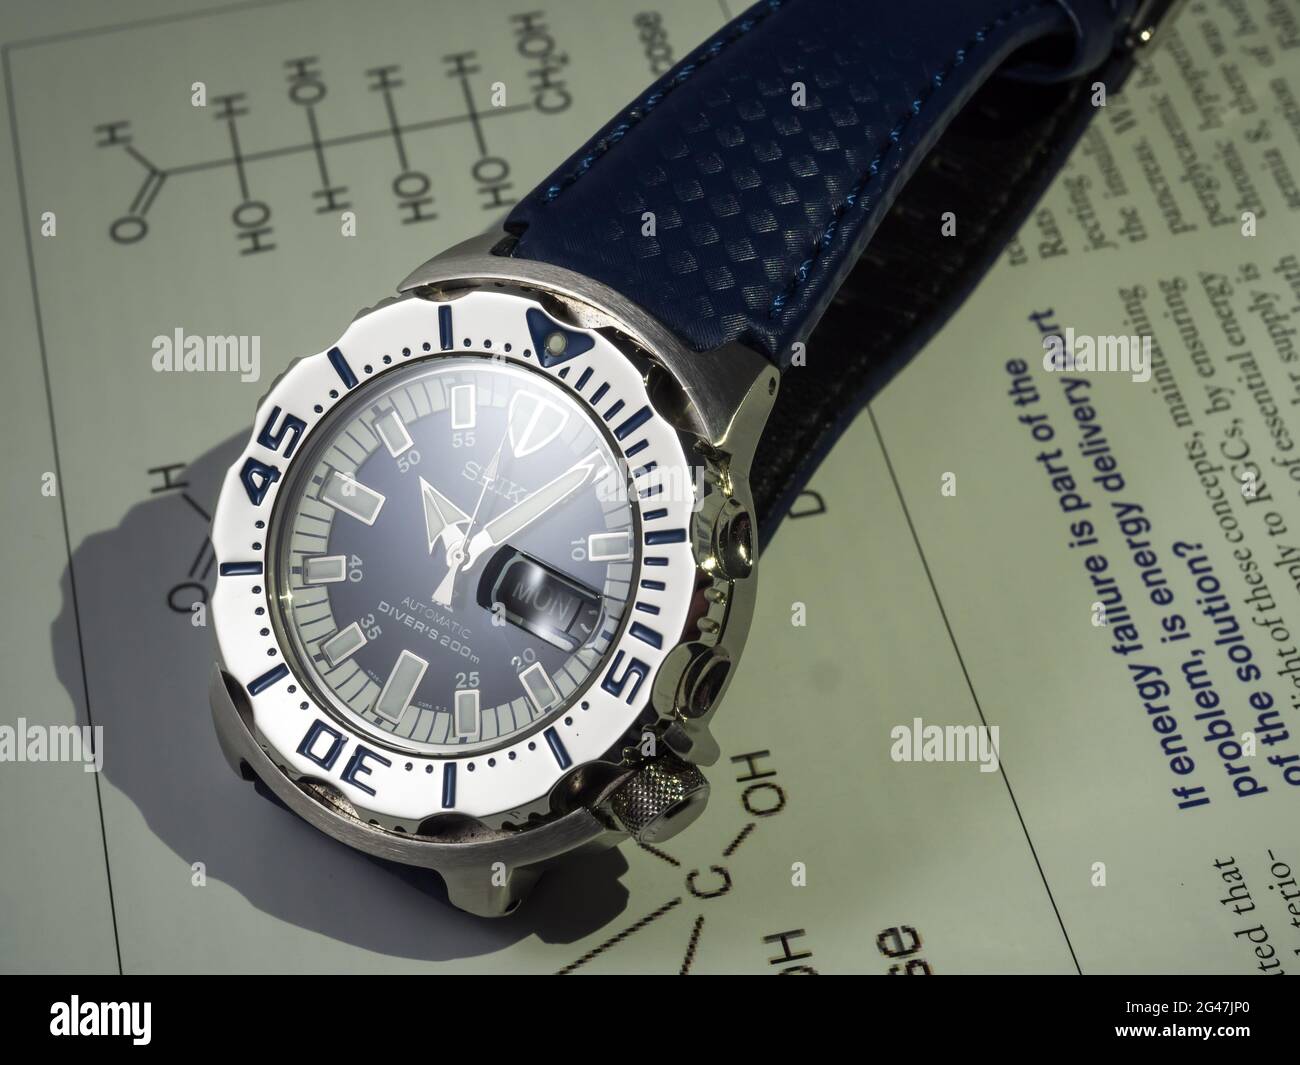 BANGKOK - SEPTEMBER 2: Seiko diver automatic watch, Royal blue monster  limited model for only Thailand, place on chemistry journal paper under low  key Stock Photo - Alamy